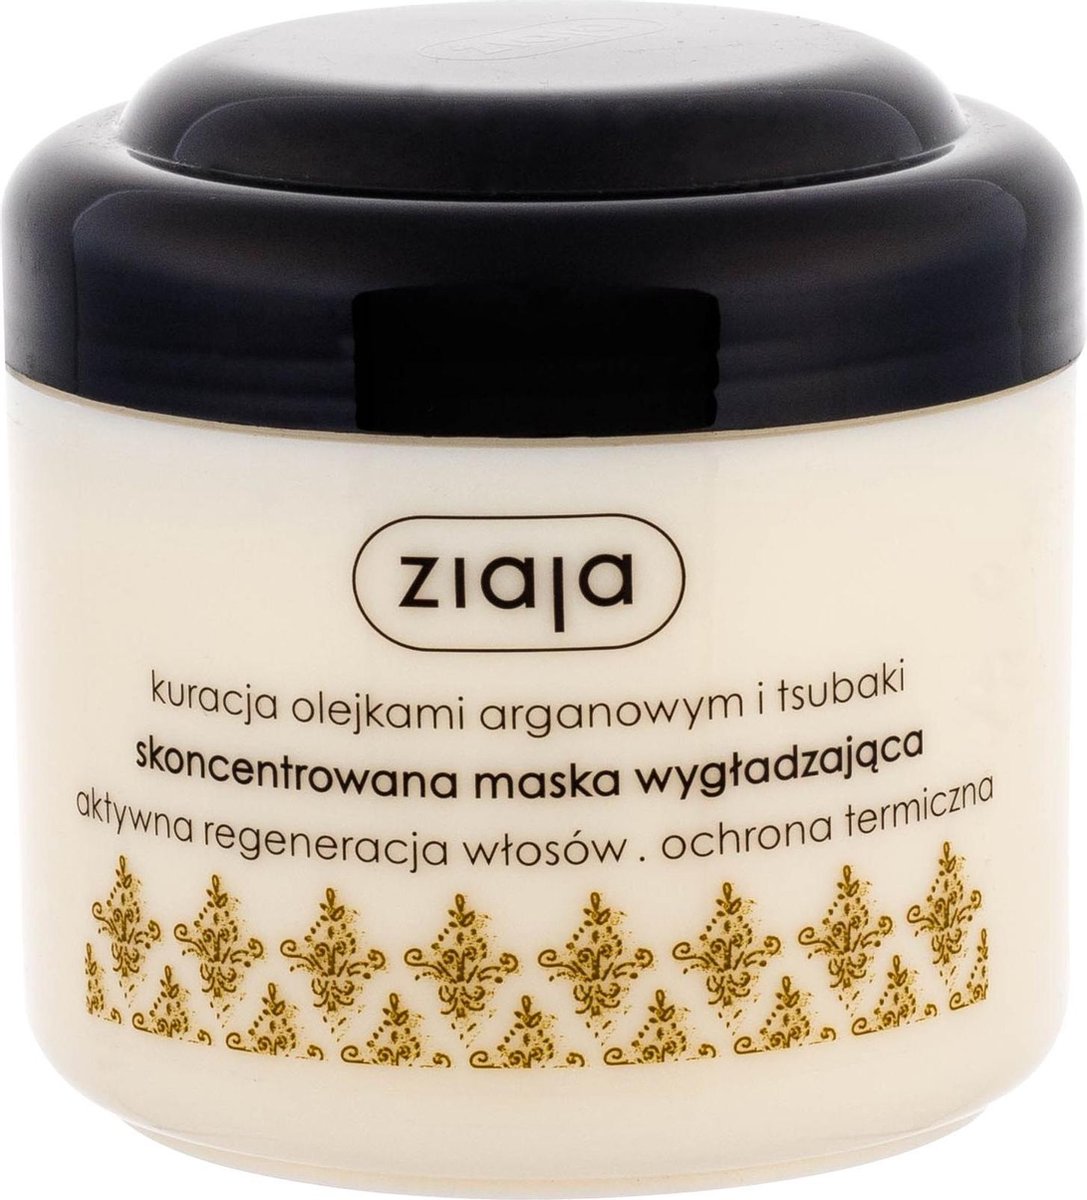 Ziaja - Exfoliating Mask Argan Oil ( Concentrate d Smoothing Hair Mask) 200 ml - 200ml